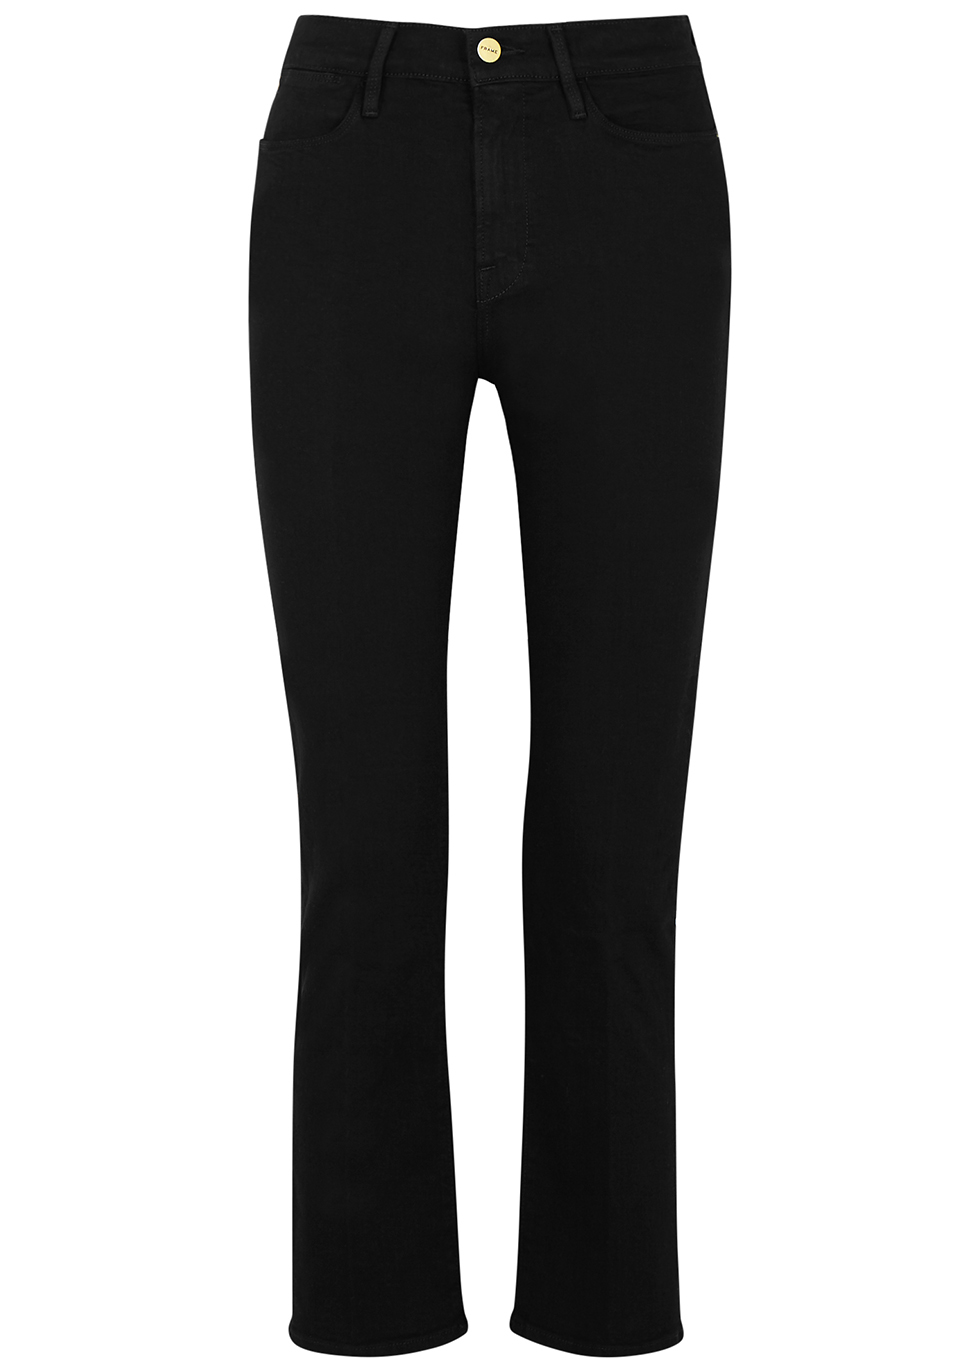 Customer Favorite Le High Straight black jeans | AccuWeather Shop